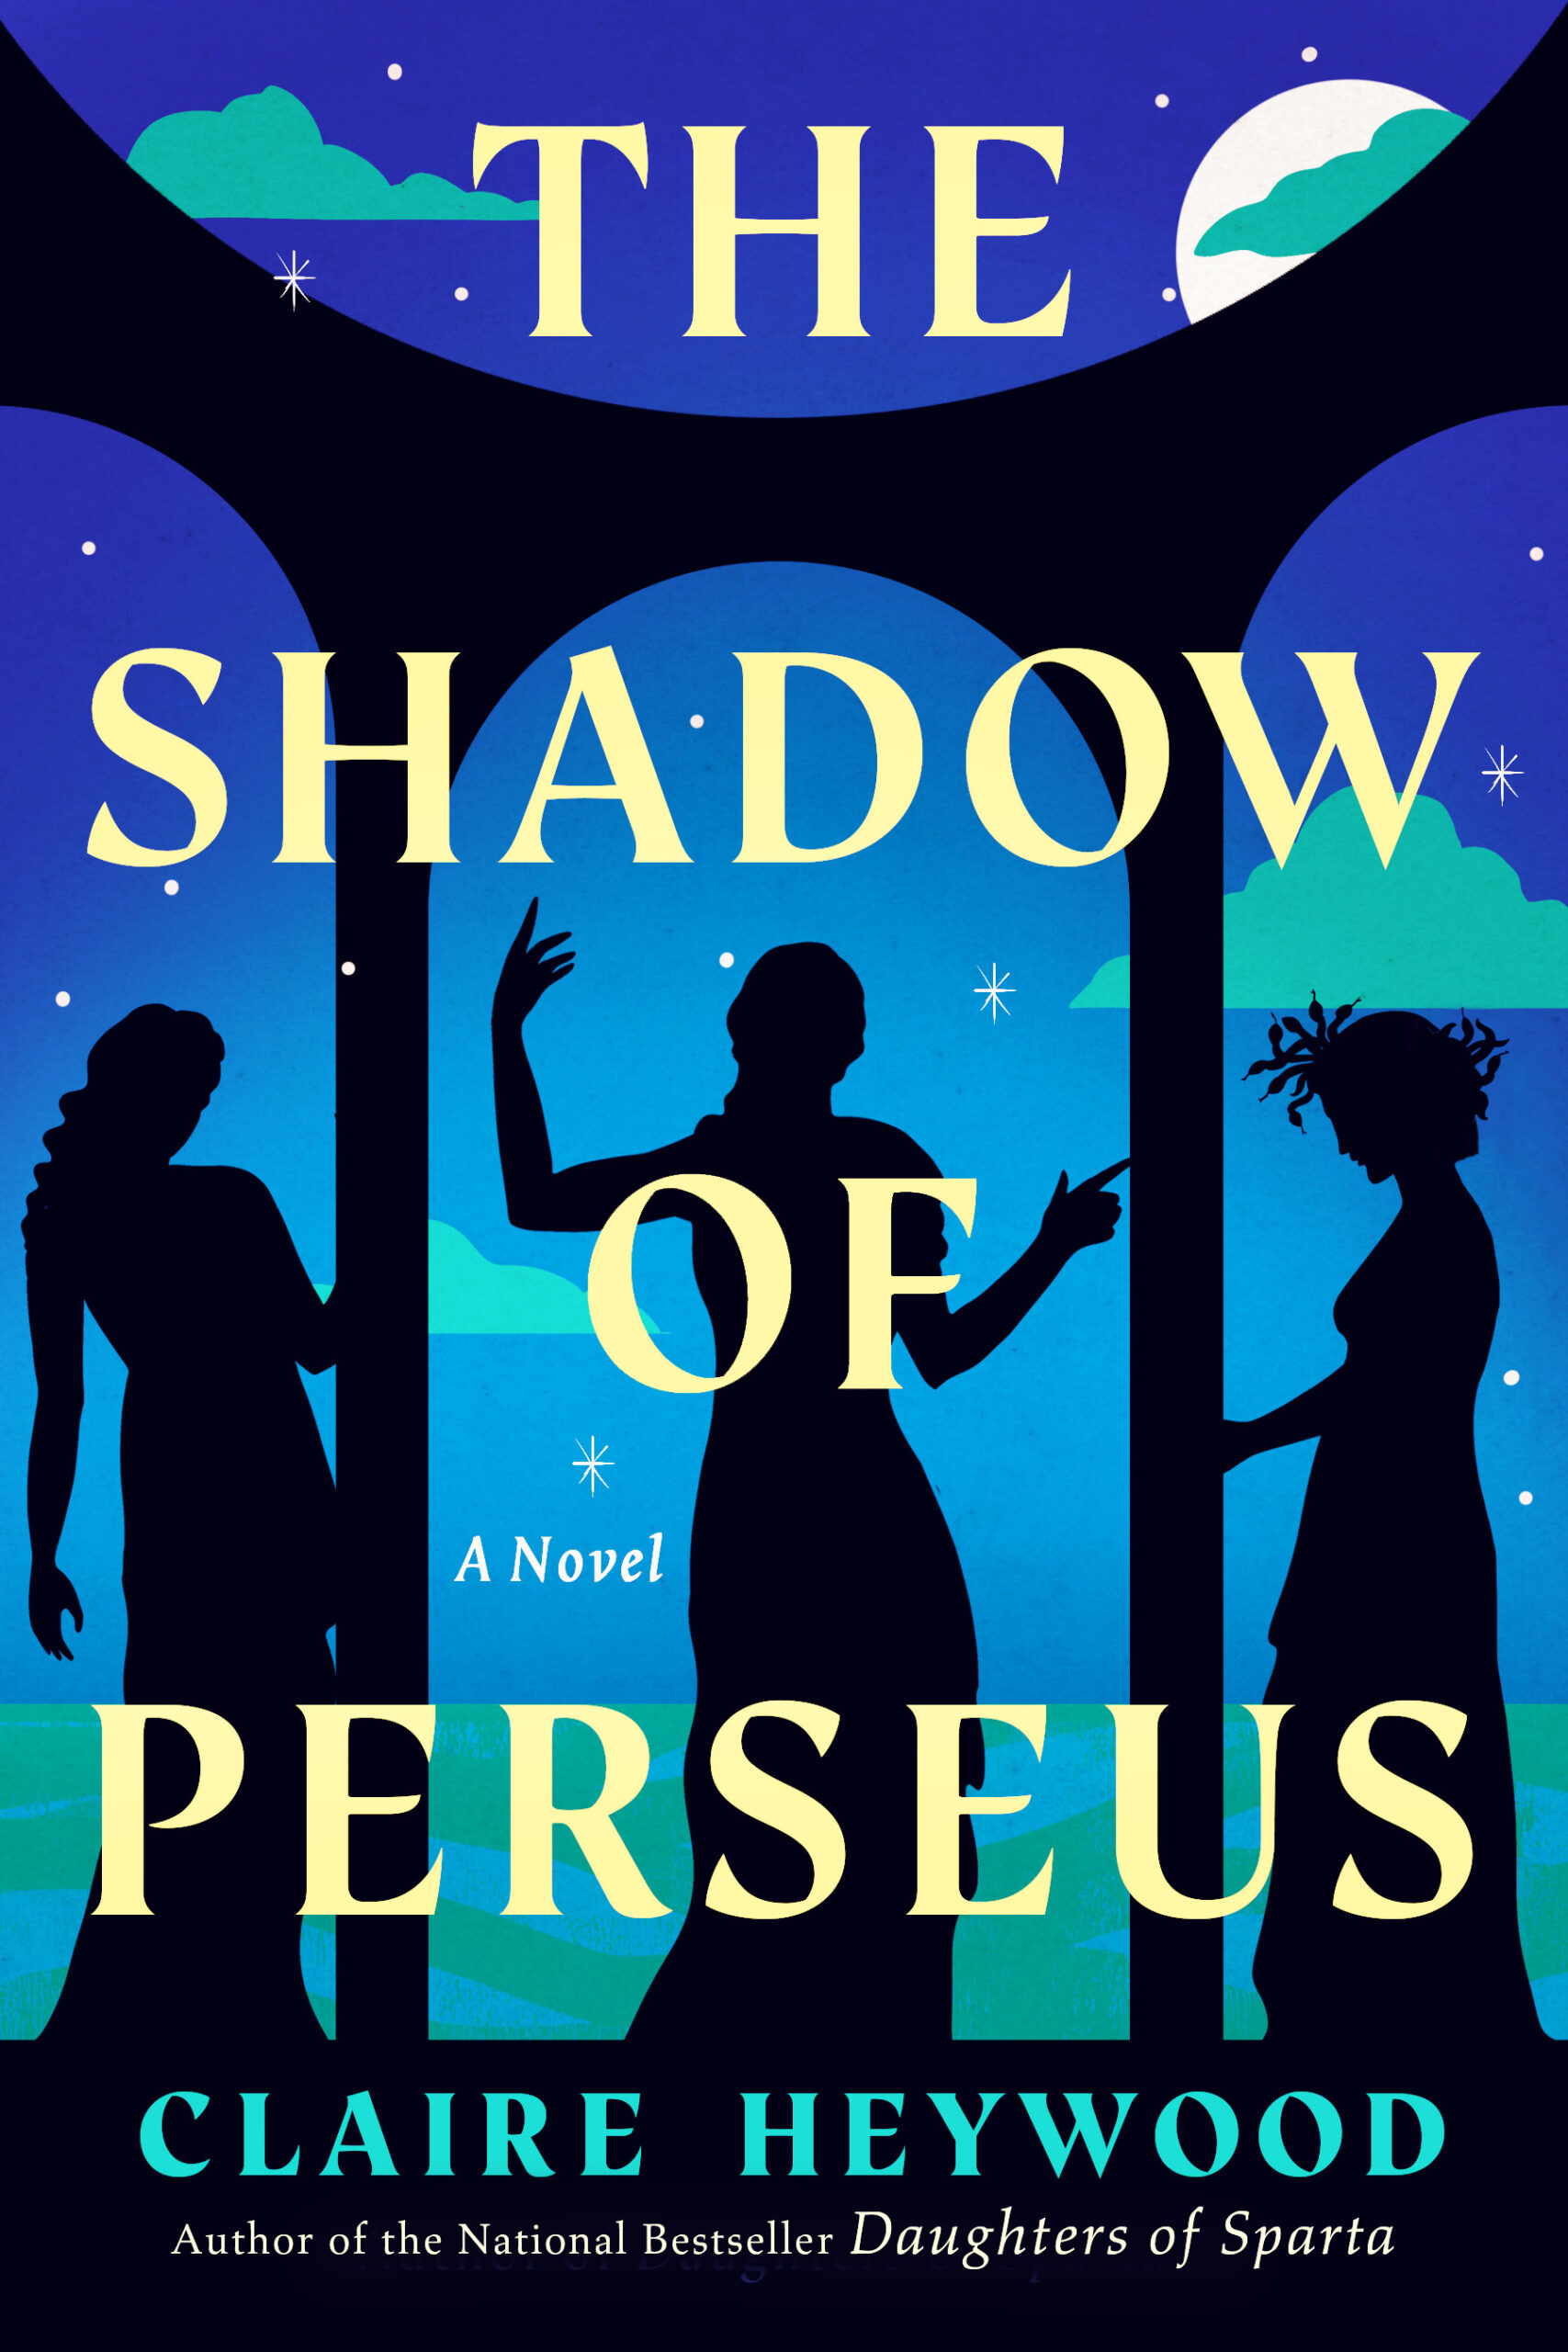 US Hardback cover of The Shadow Of Perseus by Claire Heywood